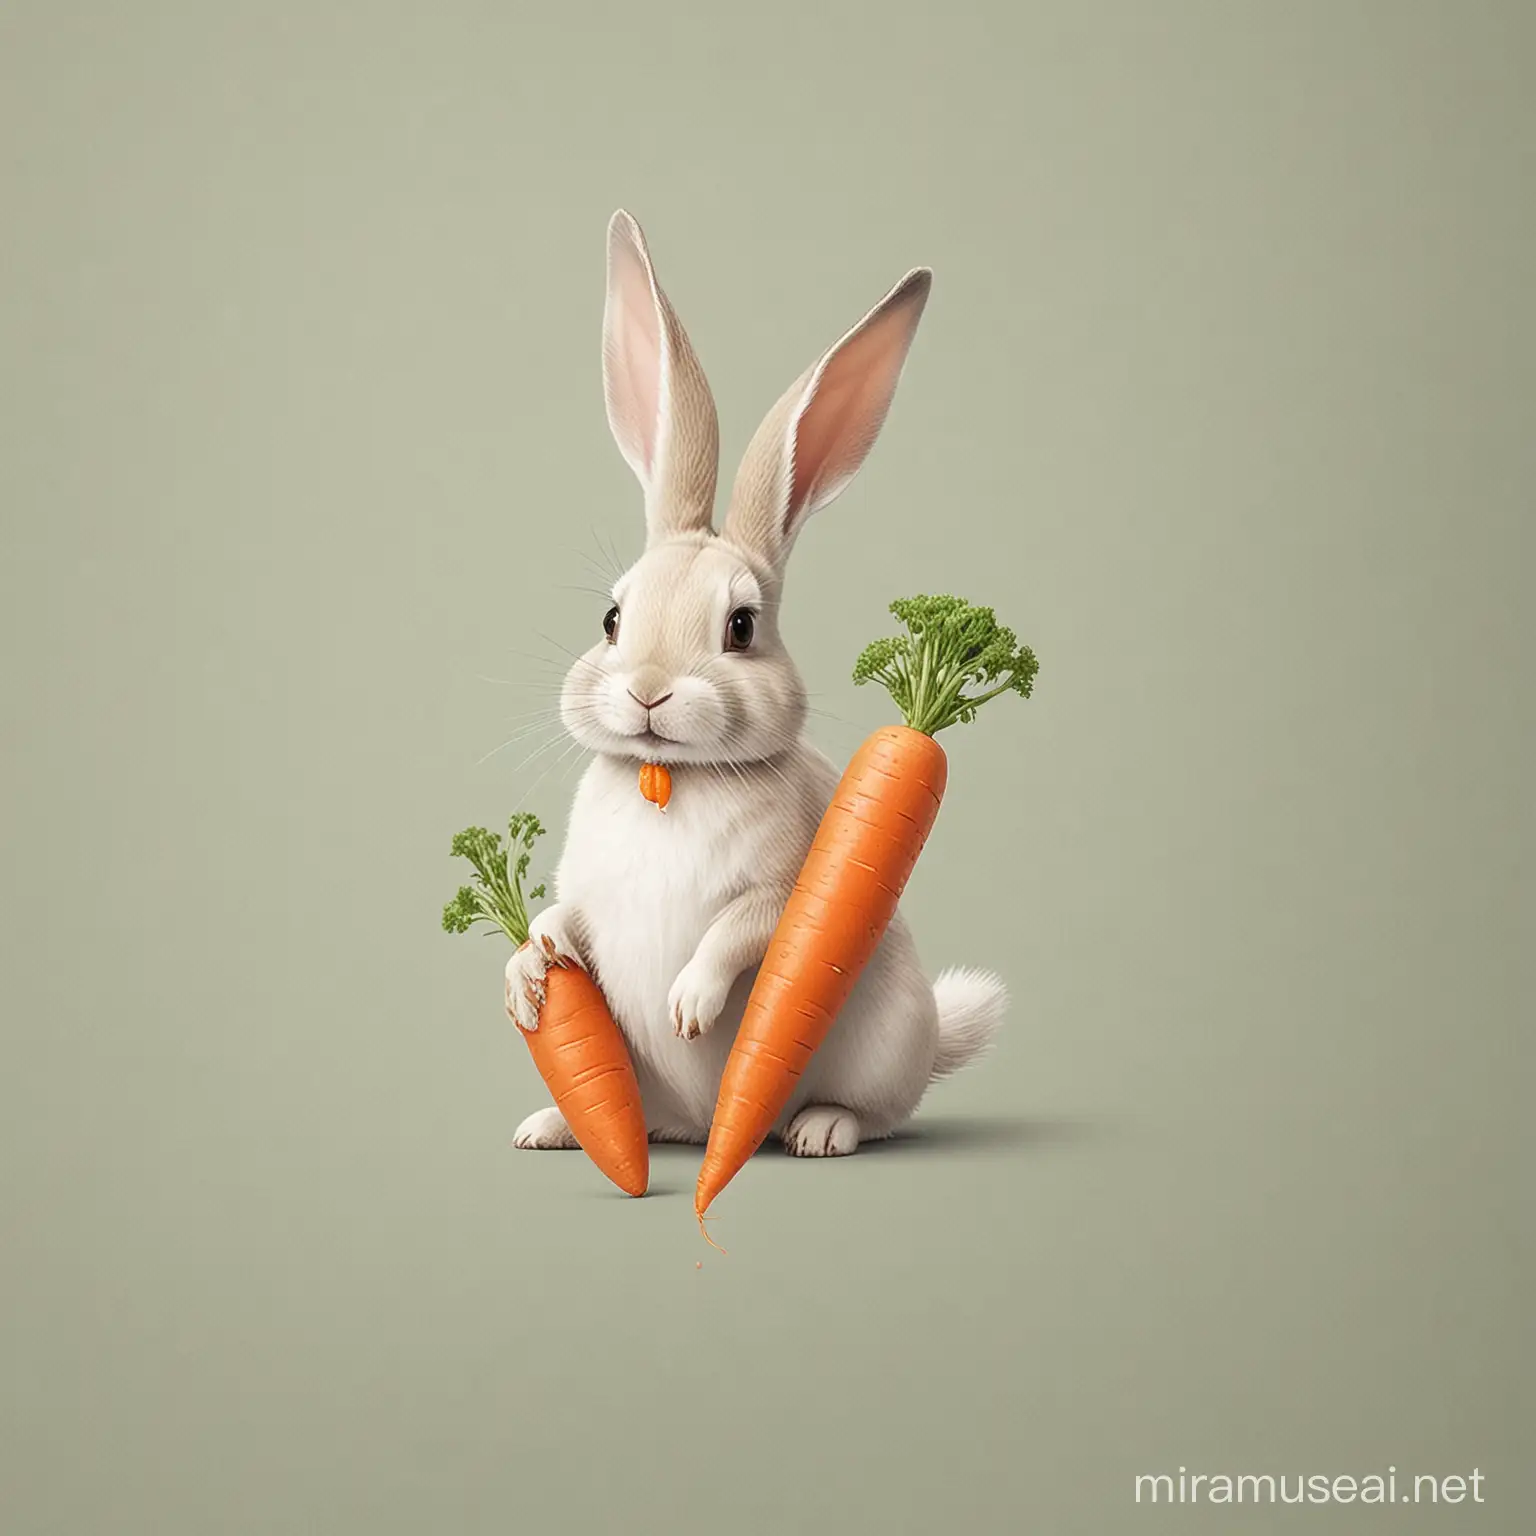 Use the same colours, however I’d like the rabbit to be a happy and eat carrot
